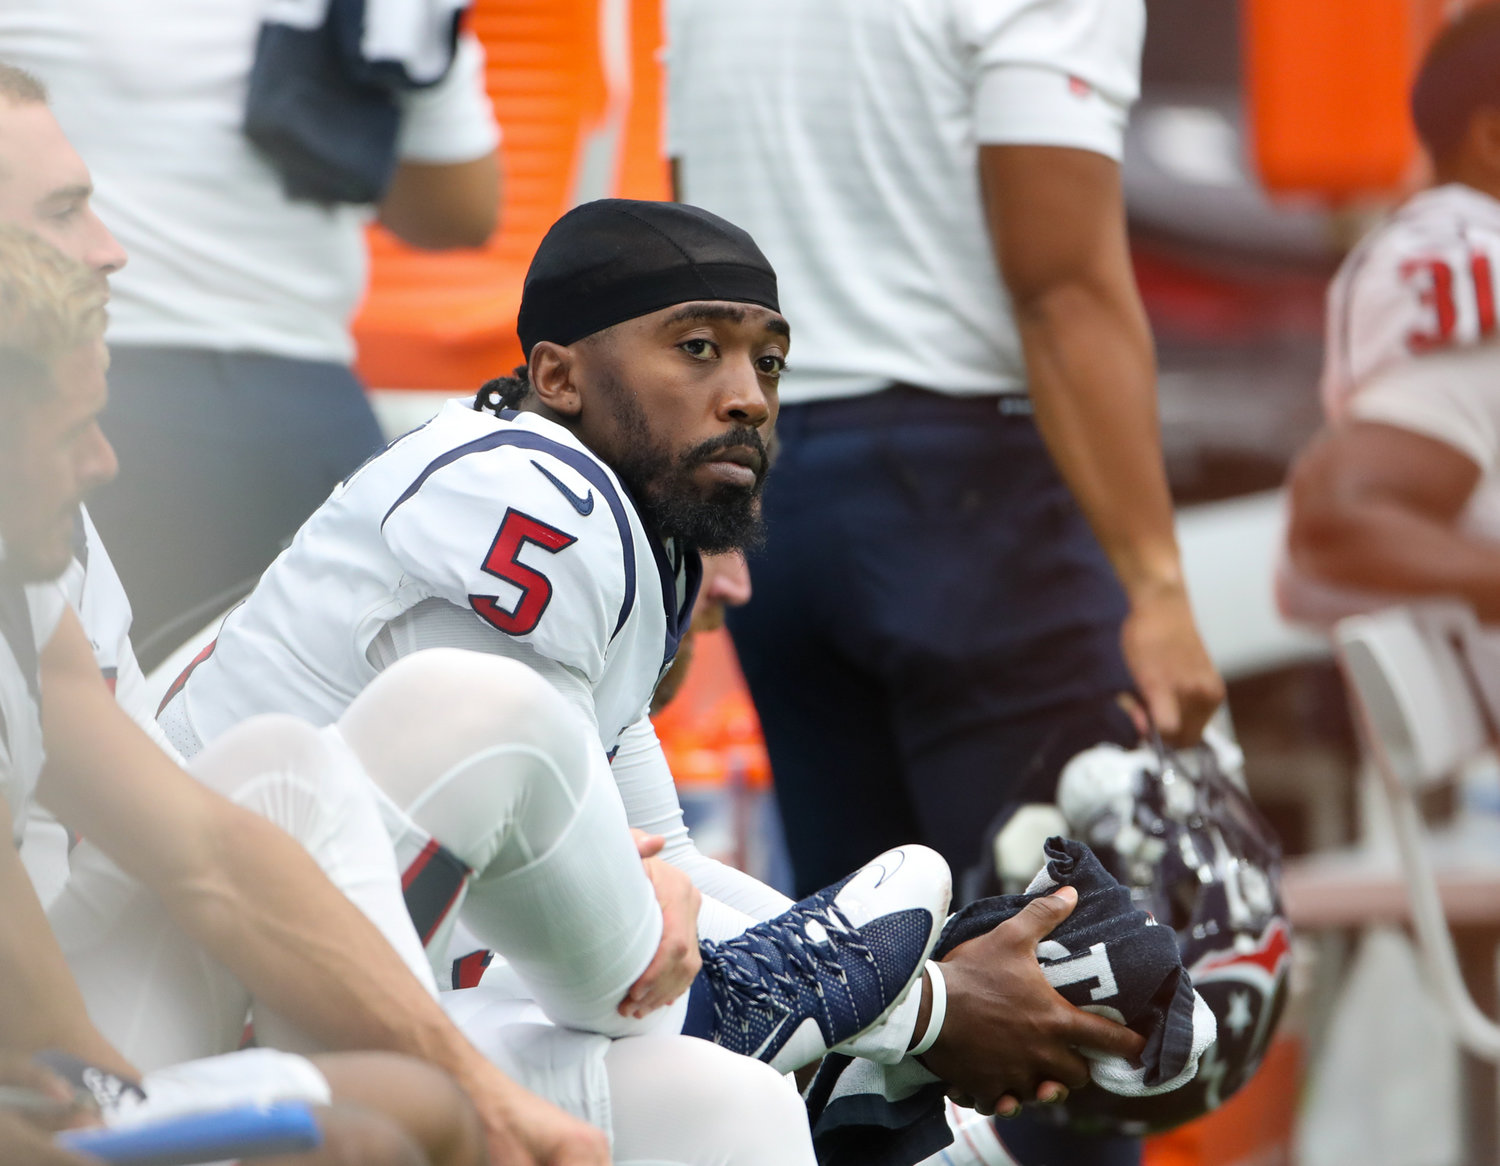 Houston Texans quarterback Tyrod Taylor (5) on the bench during the first half of an NFL game between the Houston Texans and the Jacksonville Jaguars on September 12, 2021 in Houston, Texas.